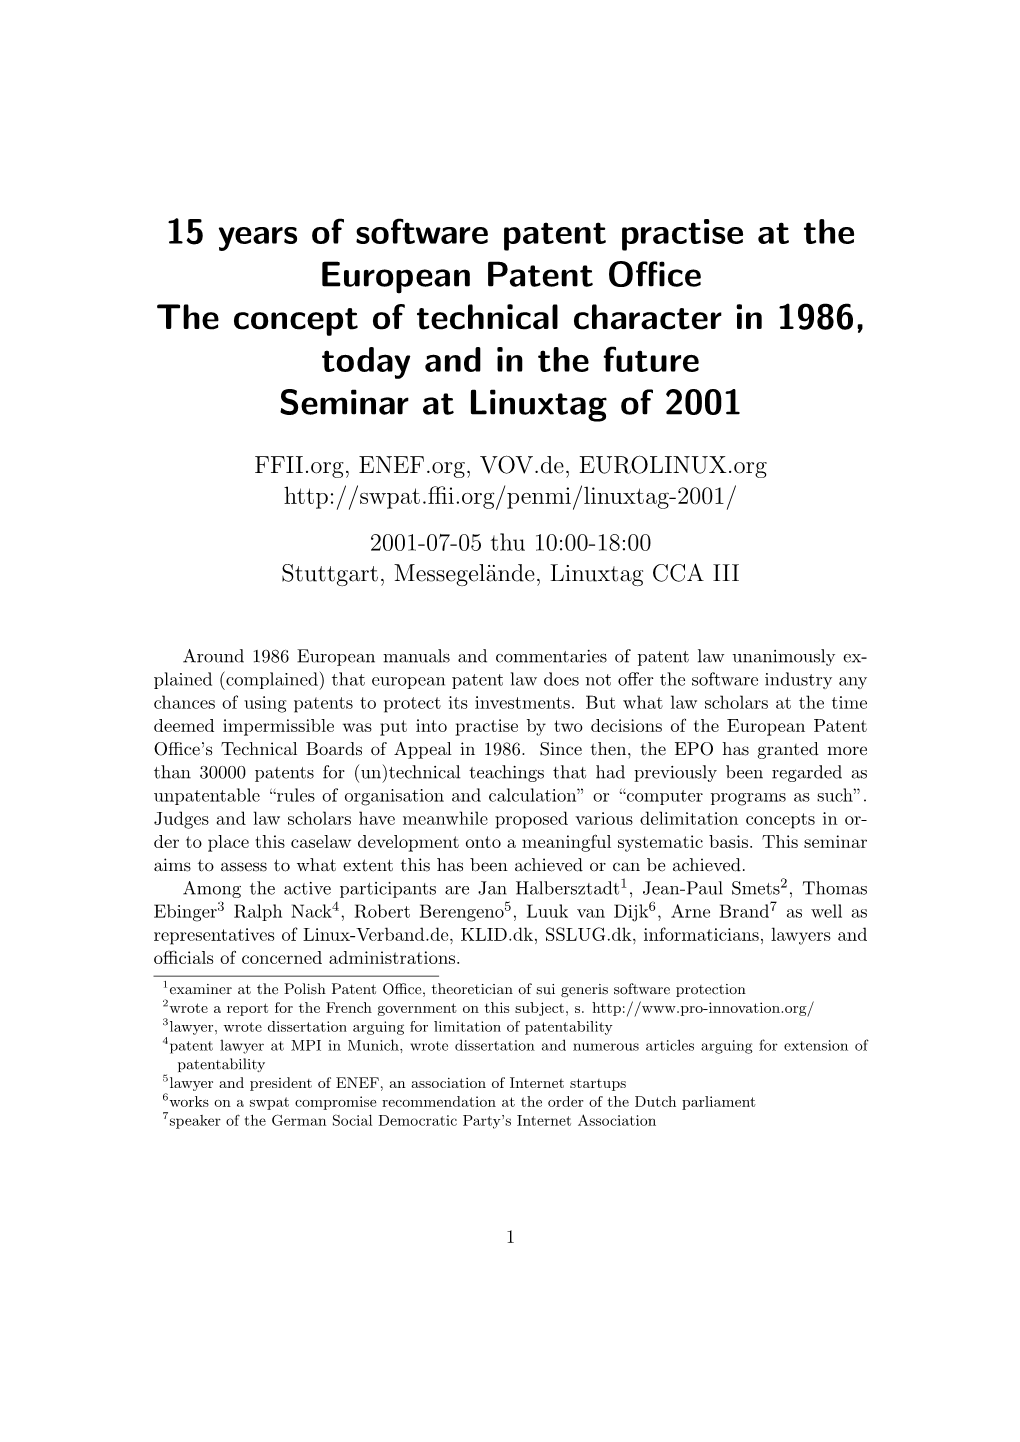 15 Years of Software Patent Practise at the European Patent Office The